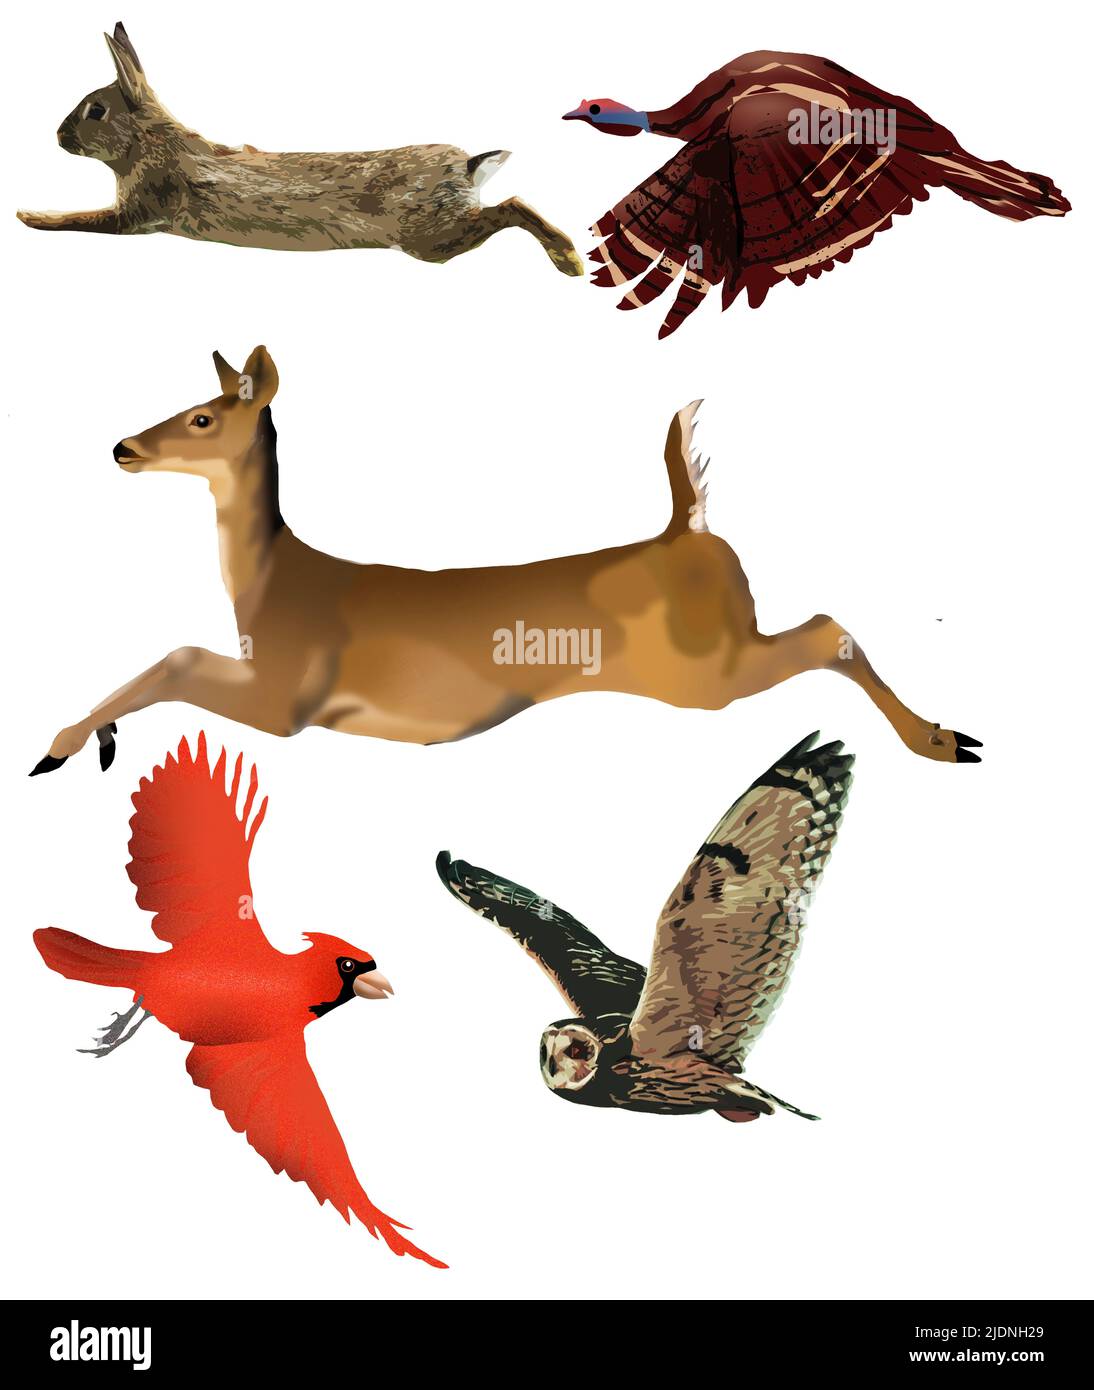 A rabbit, wild turkey, white tail deer, cardinal a flying owl are seen as 3-d illustrations to be used as a graphic resource. Stock Photo